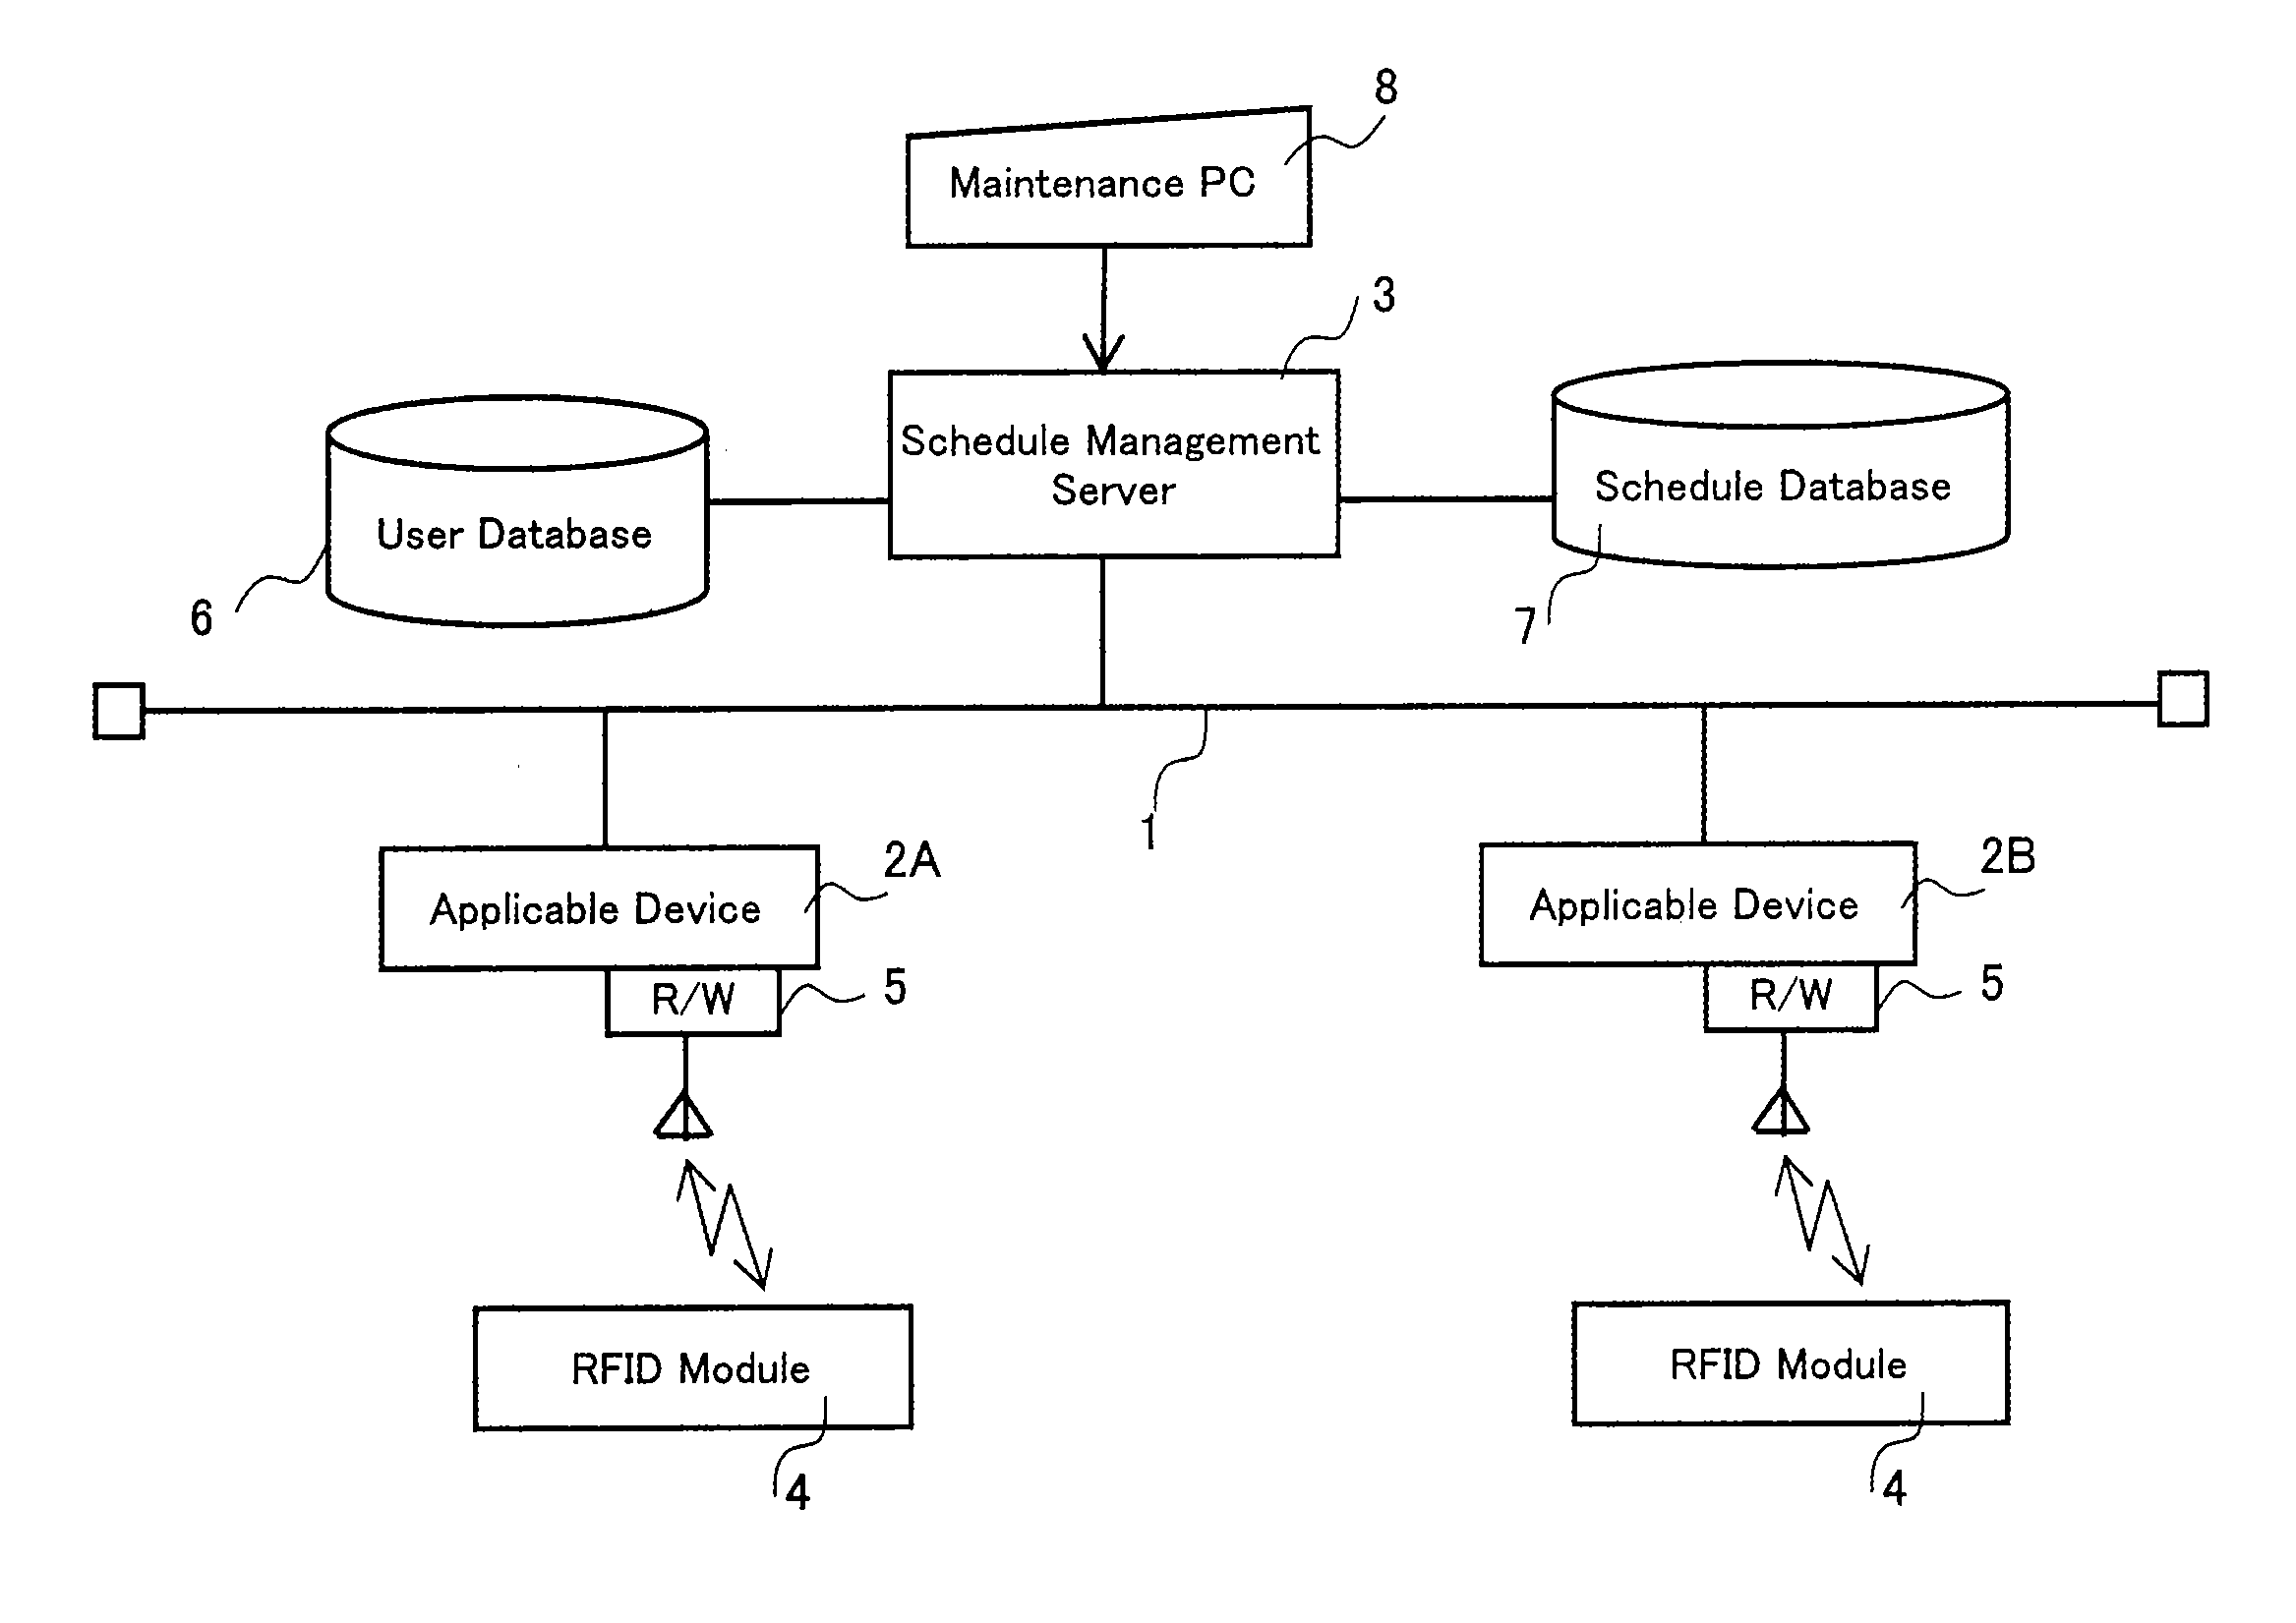 Information-Processing Device and System For Restricting Use of the Device